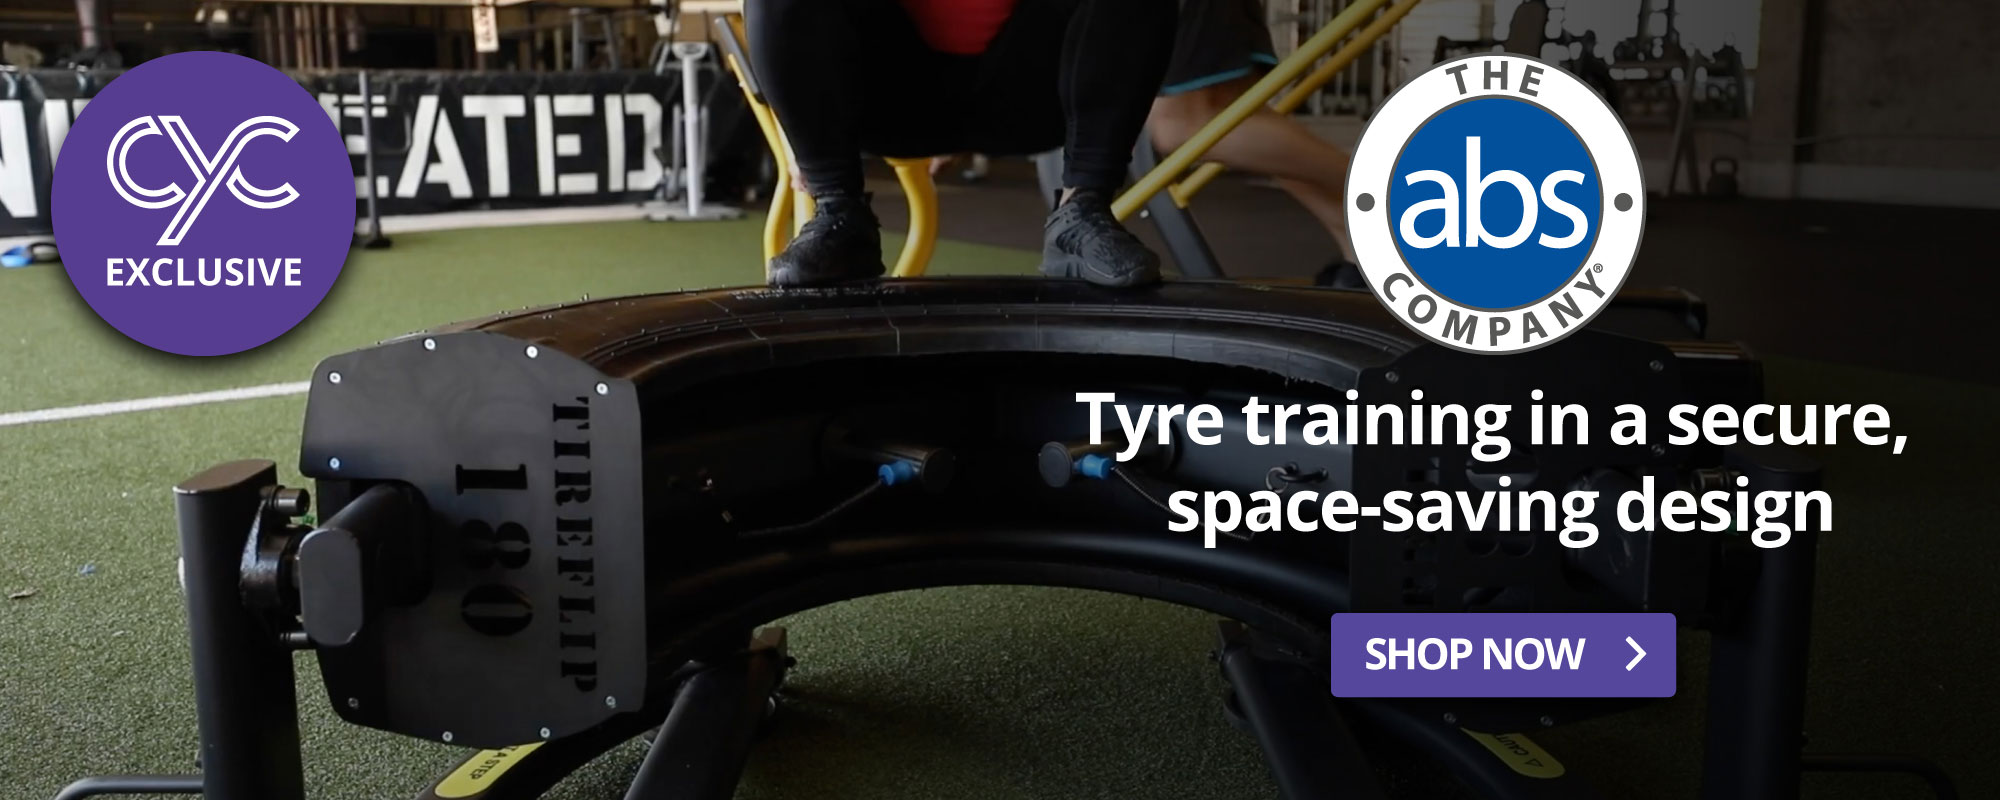 The Abs Company - Tyre training in a secure, space saving design - Shop Now